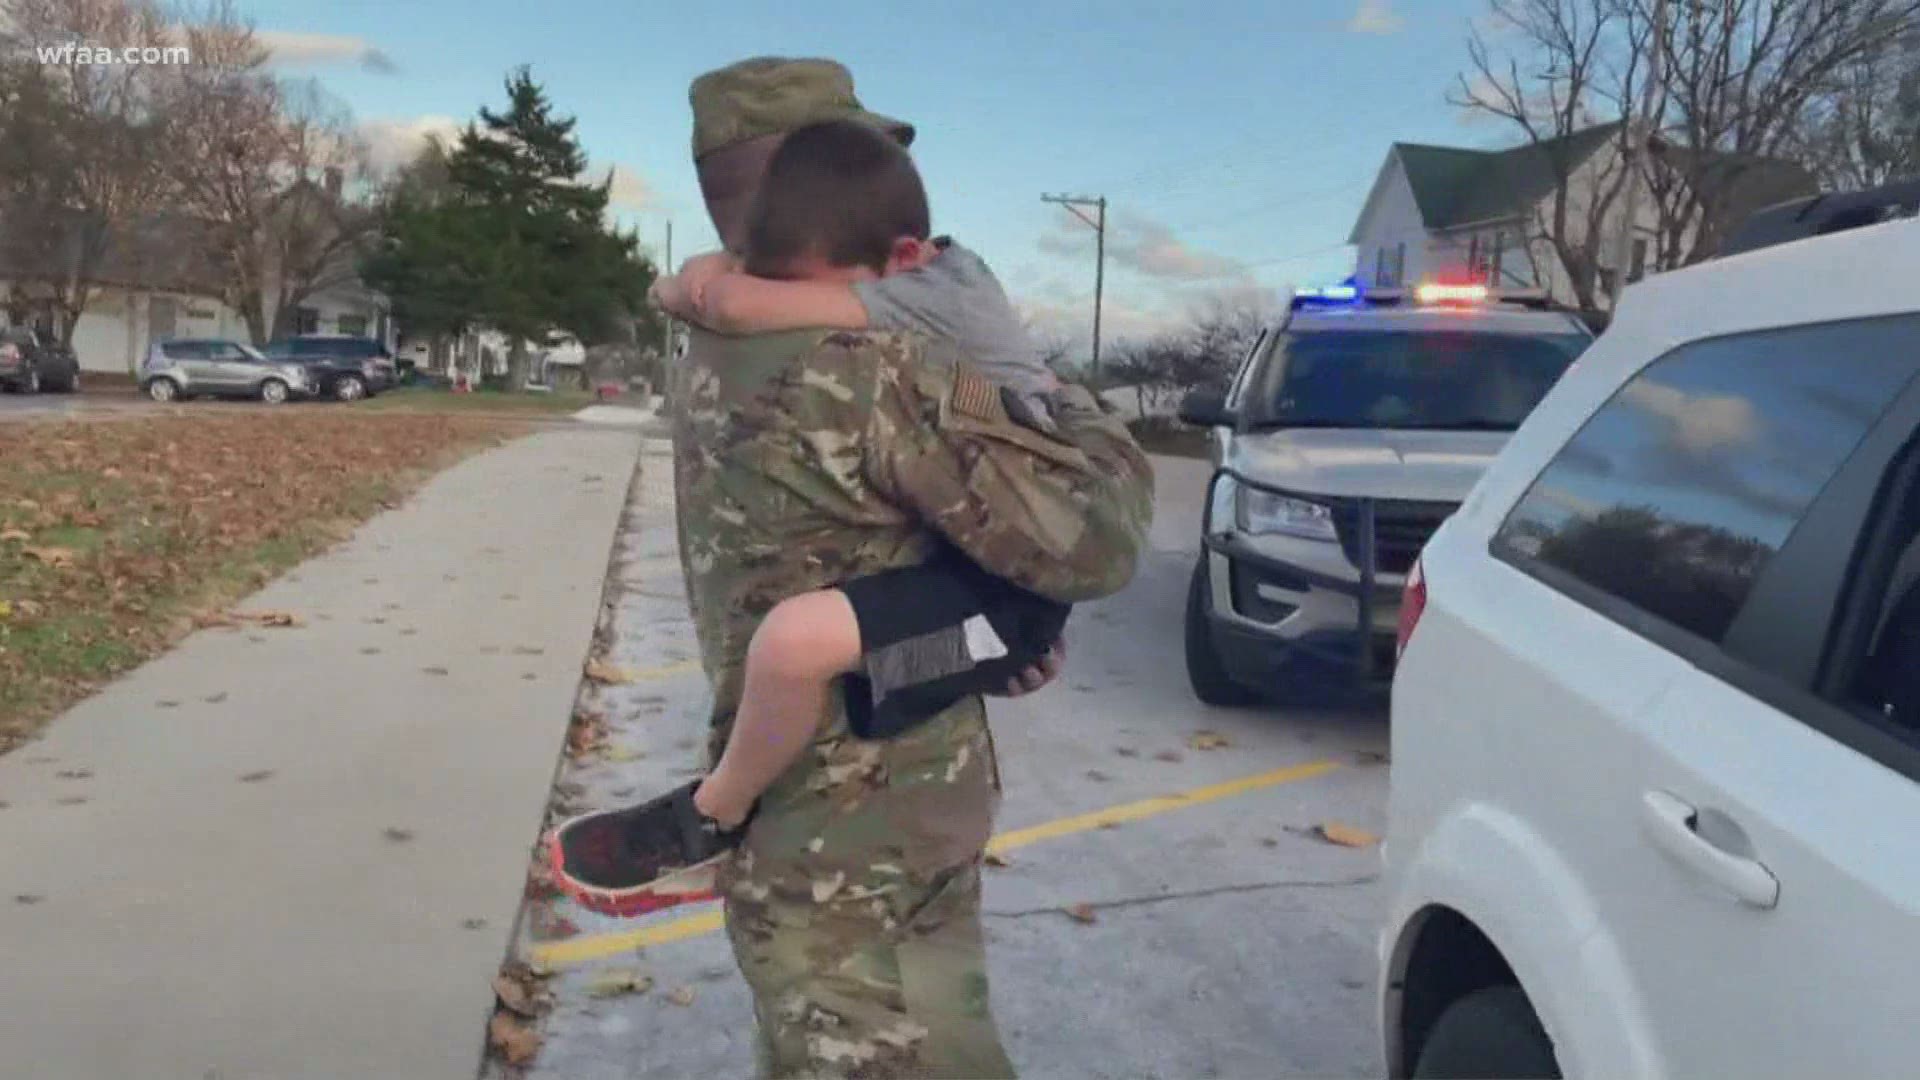 Deputy Sheriff Clint Thomas had just gotten back from a four-month deployment to Afghanistan with the Air Force when he surprised his son during a fake traffic stop.